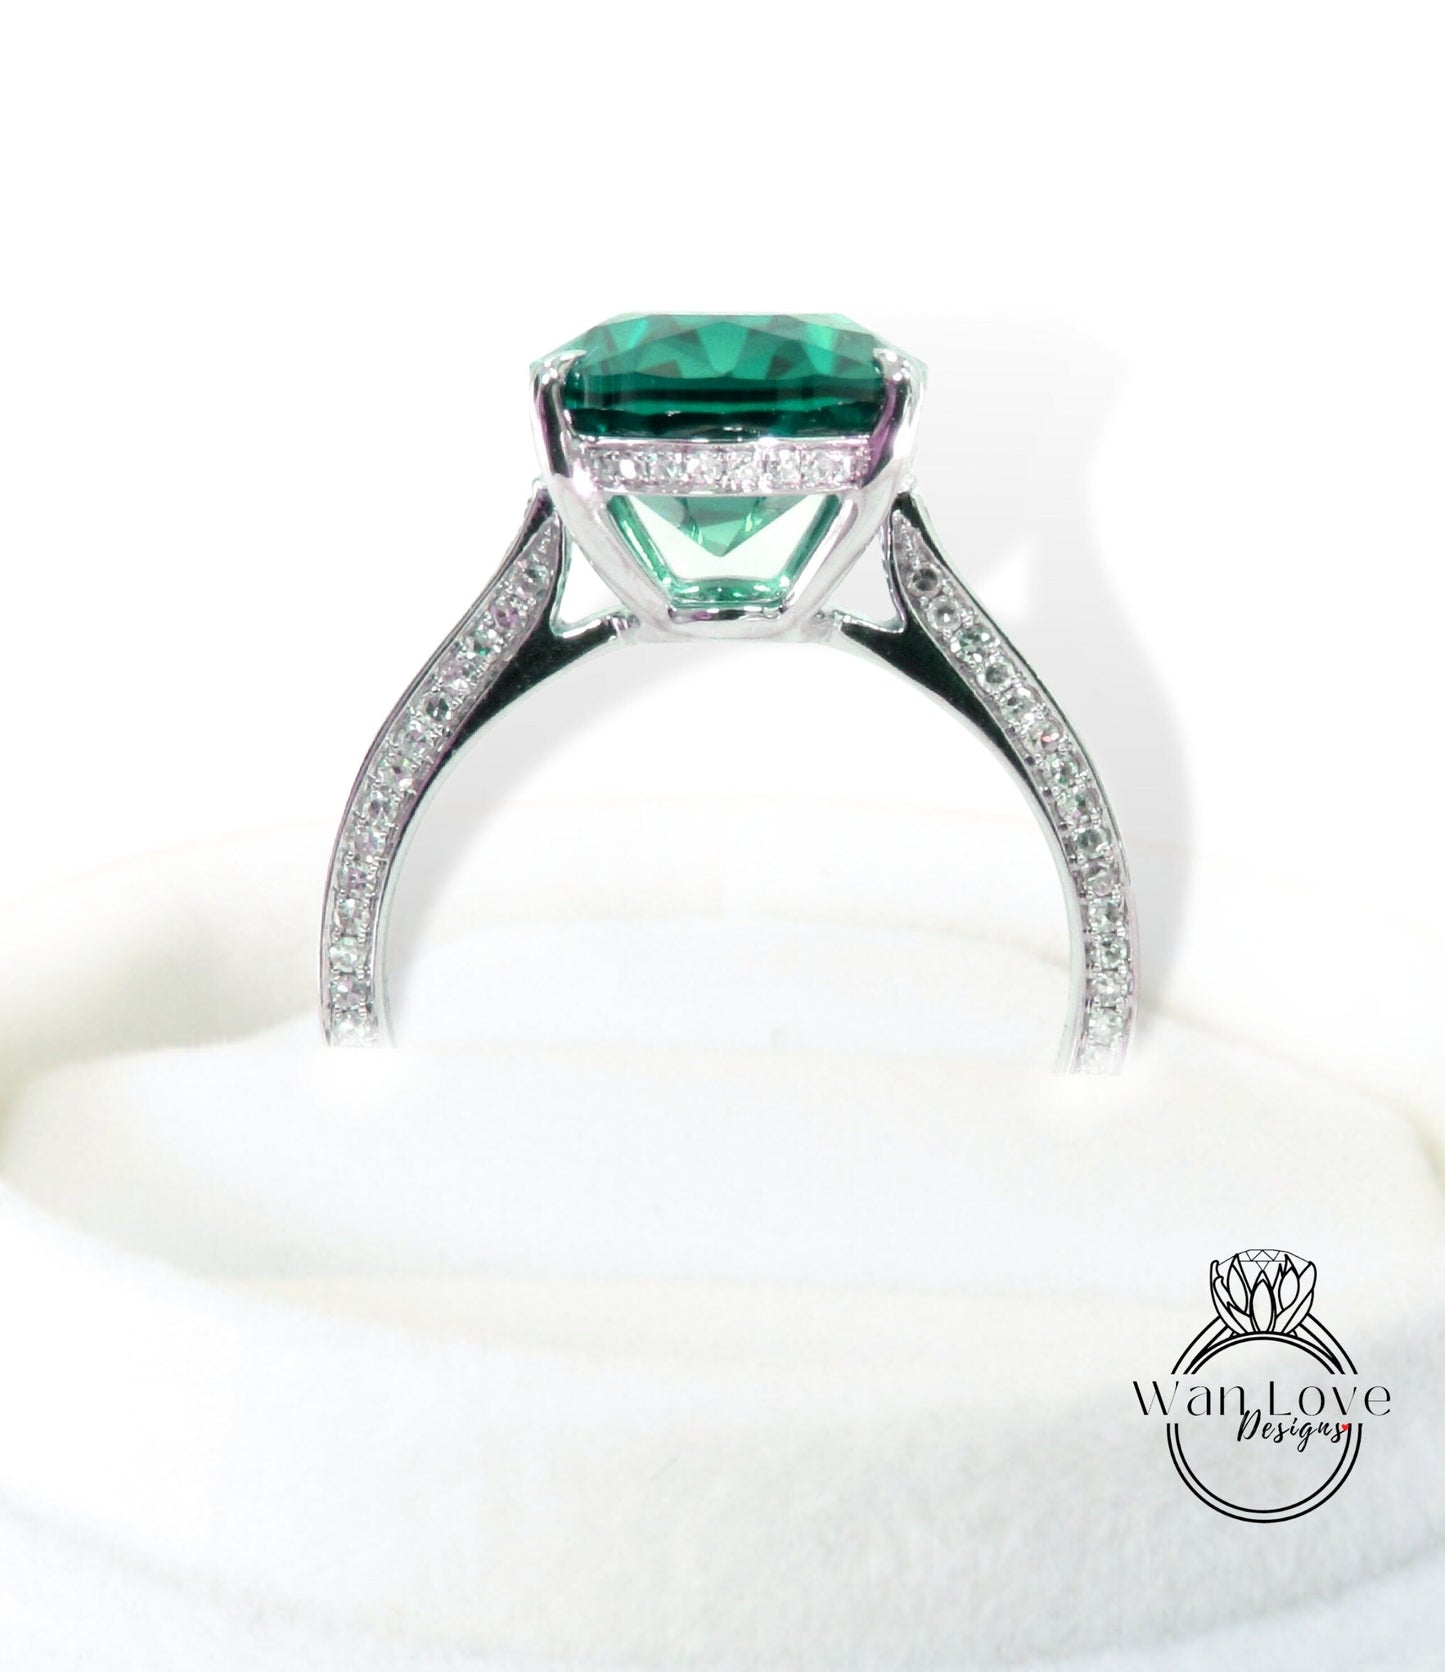 Oval Emerald Engagement Ring Celebrity style Ring Vintage Diamonds Side Hidden Halo Wedding Ring Art Deco Anniversary Gift for her Wan Love Designs